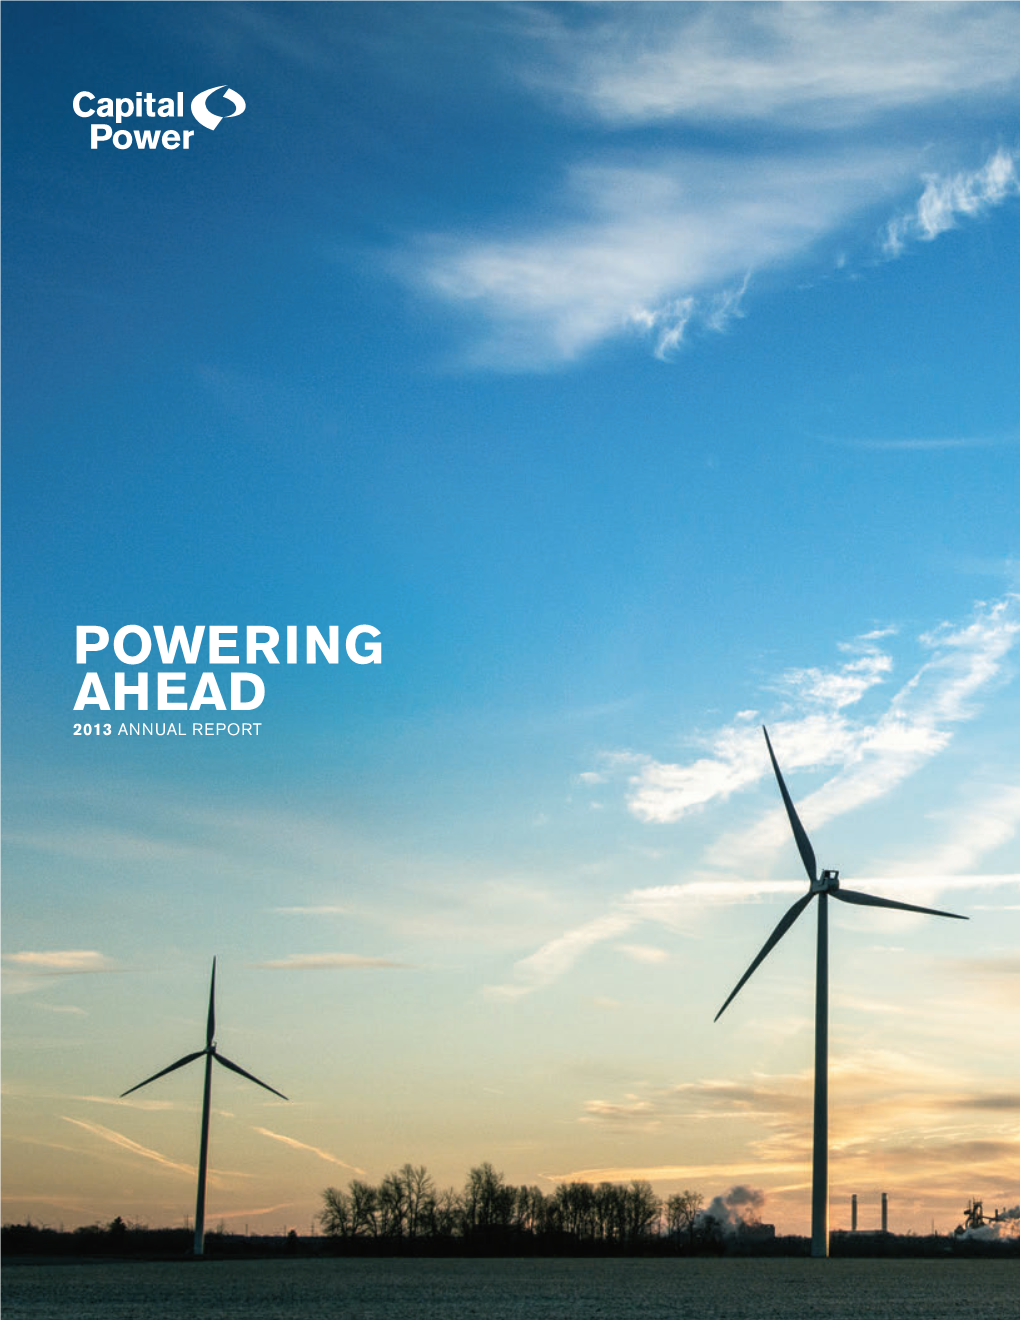 2013 ANNUAL REPORT OUR VISION Is to Be Recognized As One of North America’S Most Respected, Reliable, and Competitive Power Generators